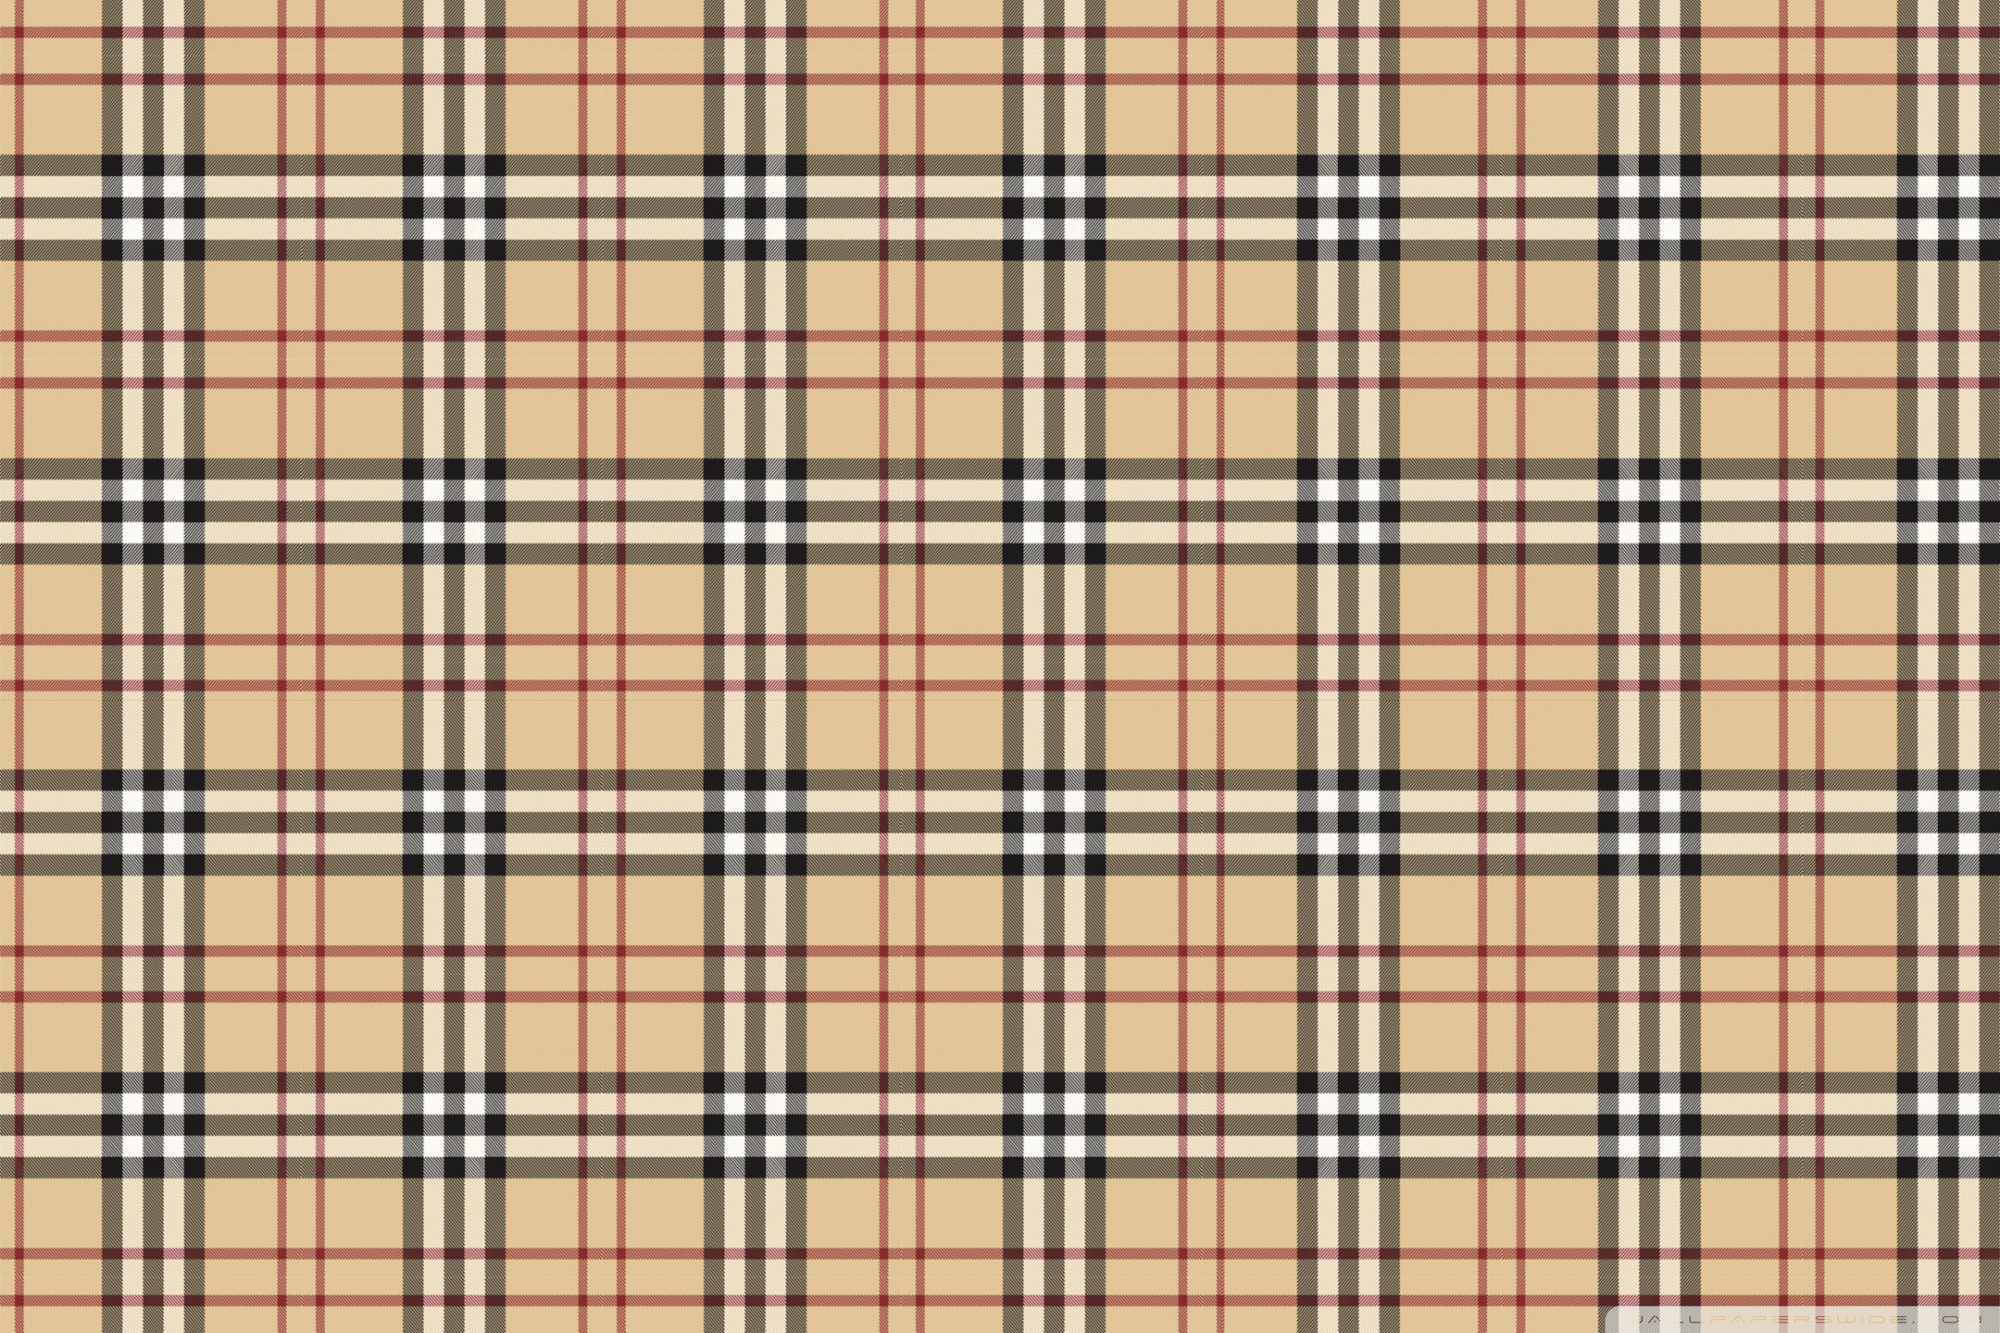 Burberry HD Wallpapers  Wallpaper Cave